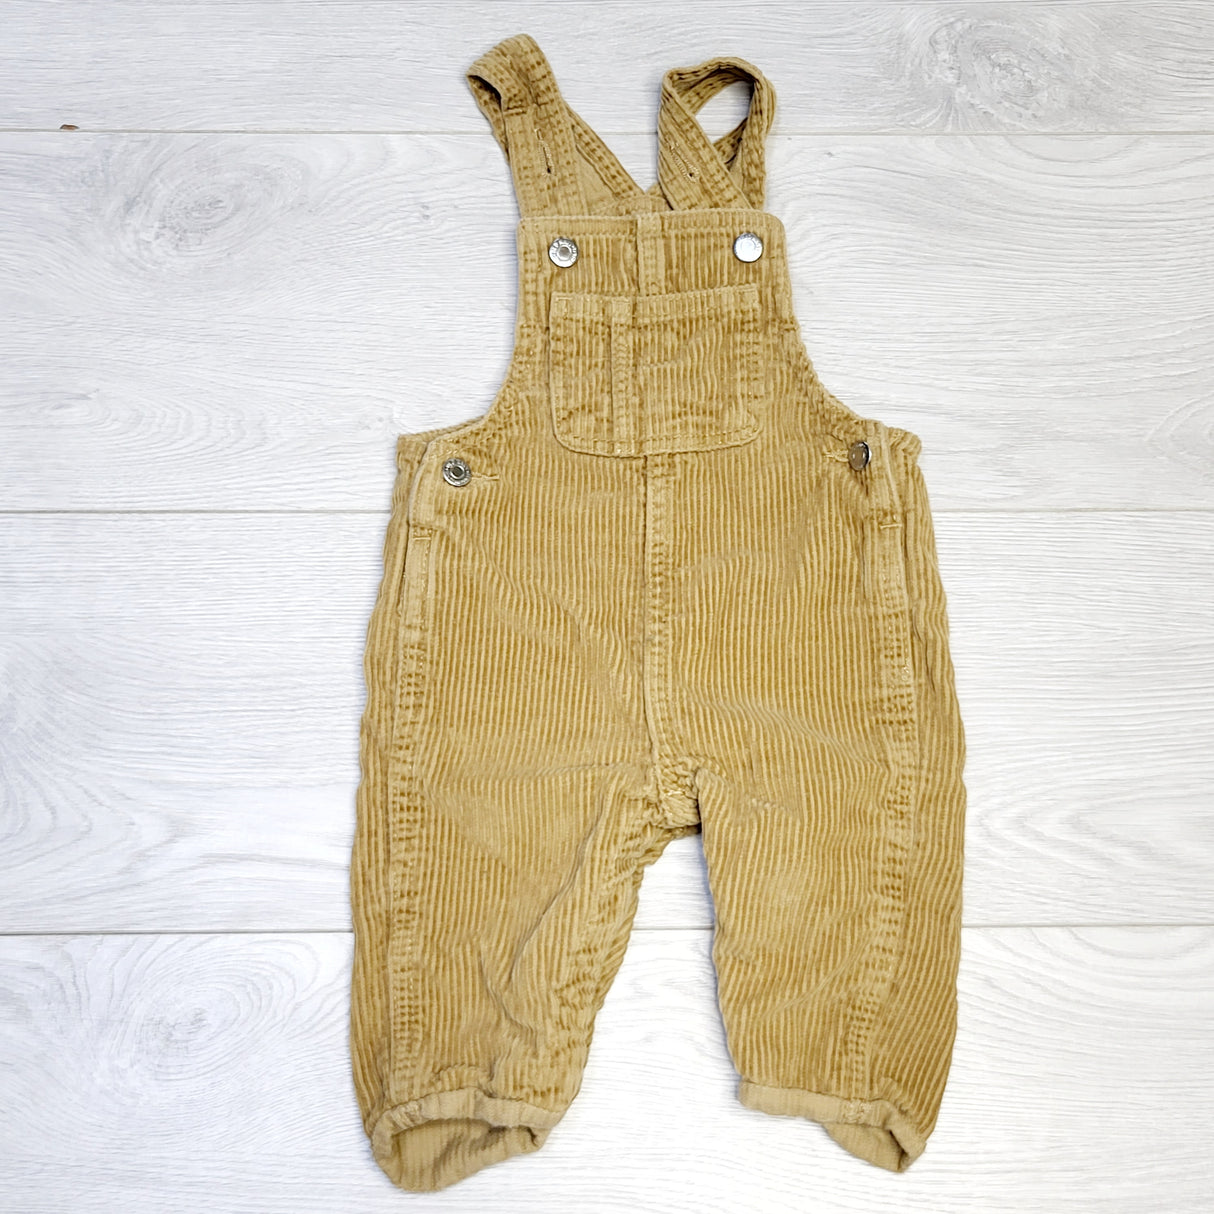 COWN1 - Old Navy tan corduroy overalls. Size 3-6 months